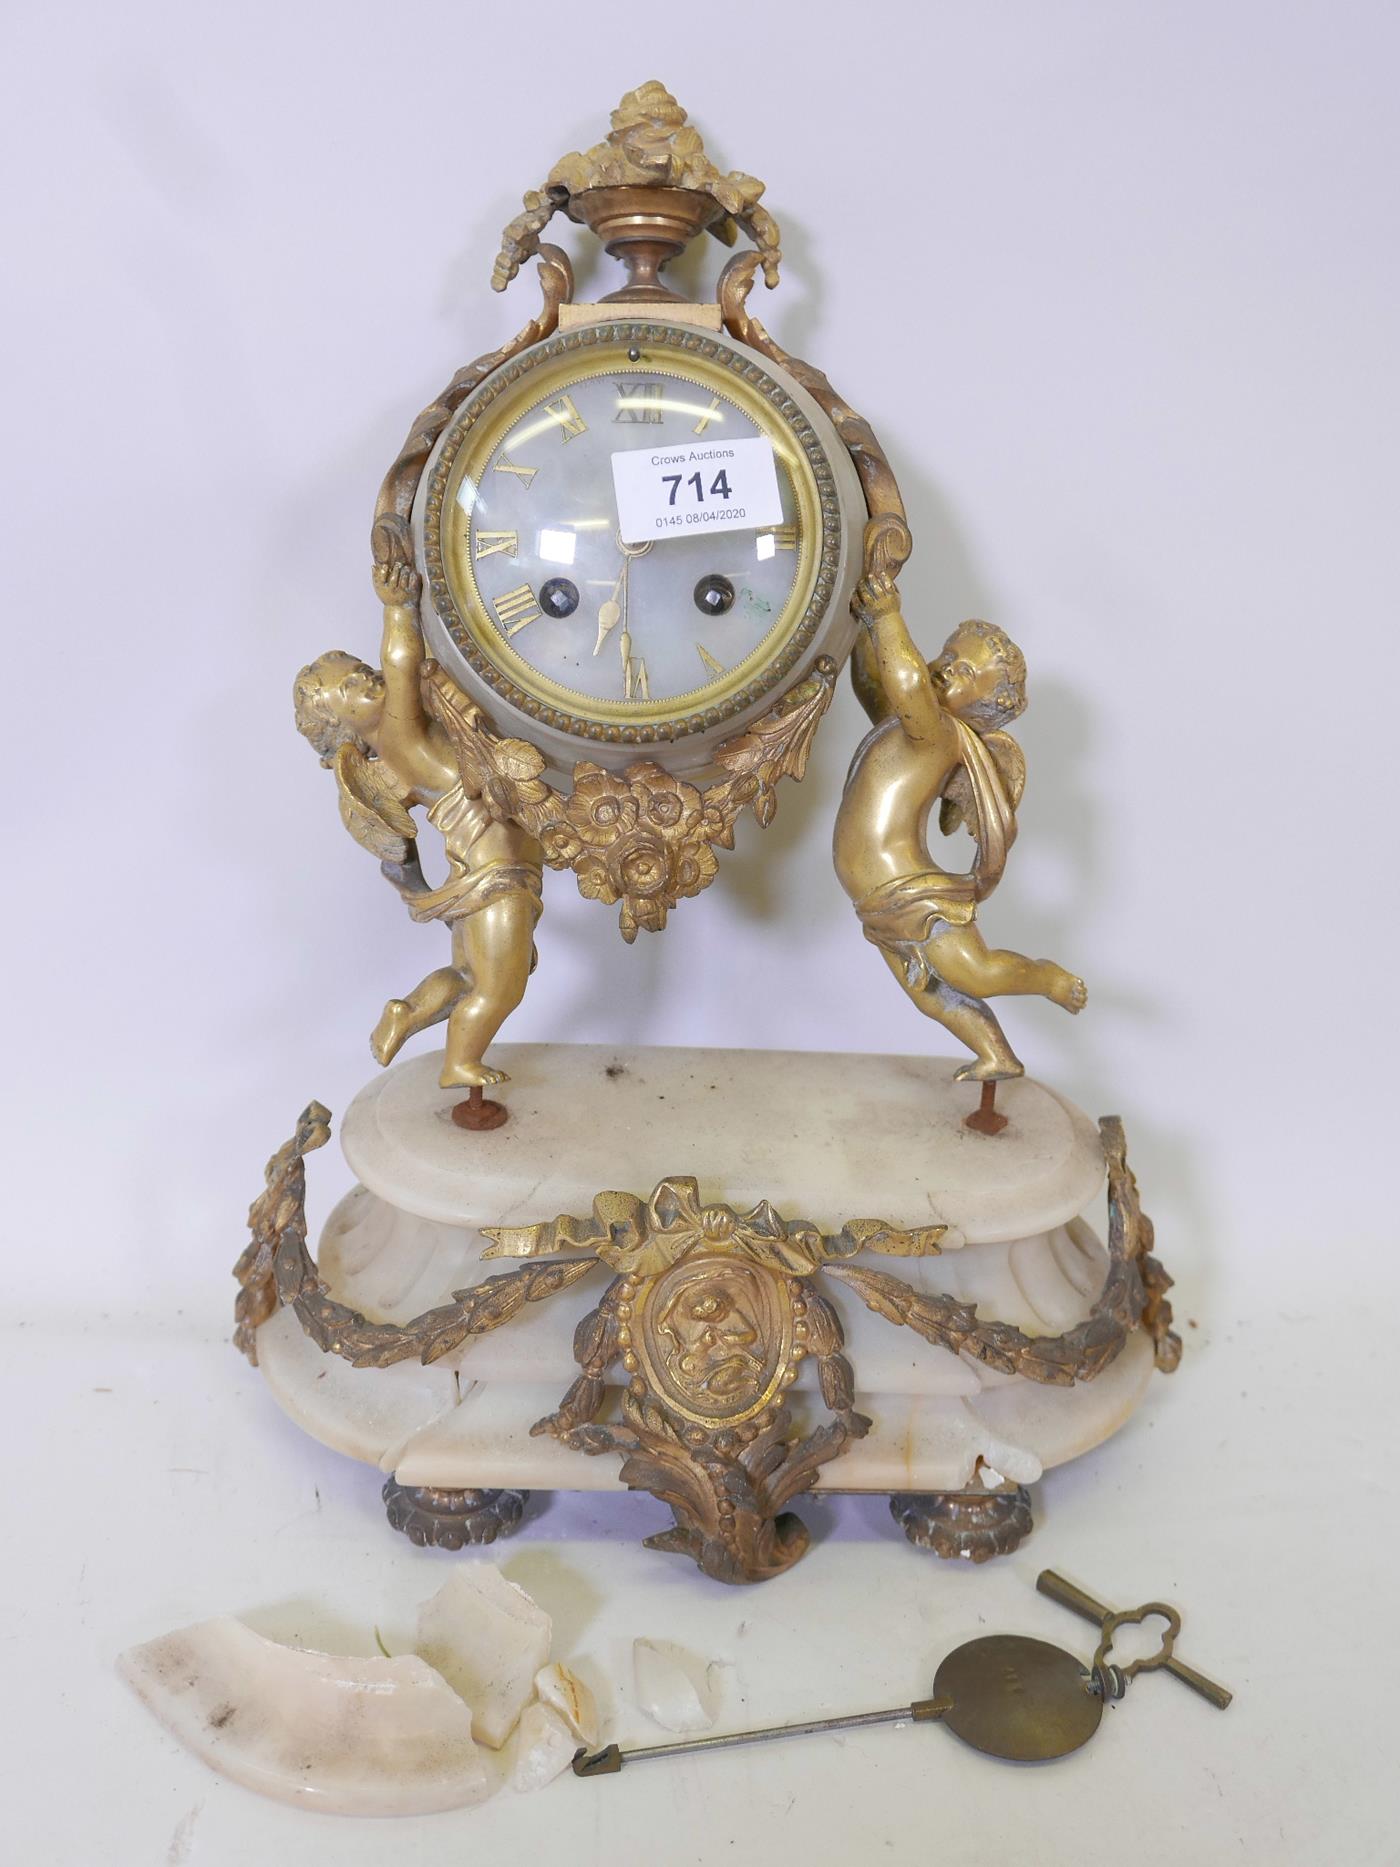 A French C19th alabaster and brass mounted mantel clock, the movement stamped Hy Marc. Paris, and